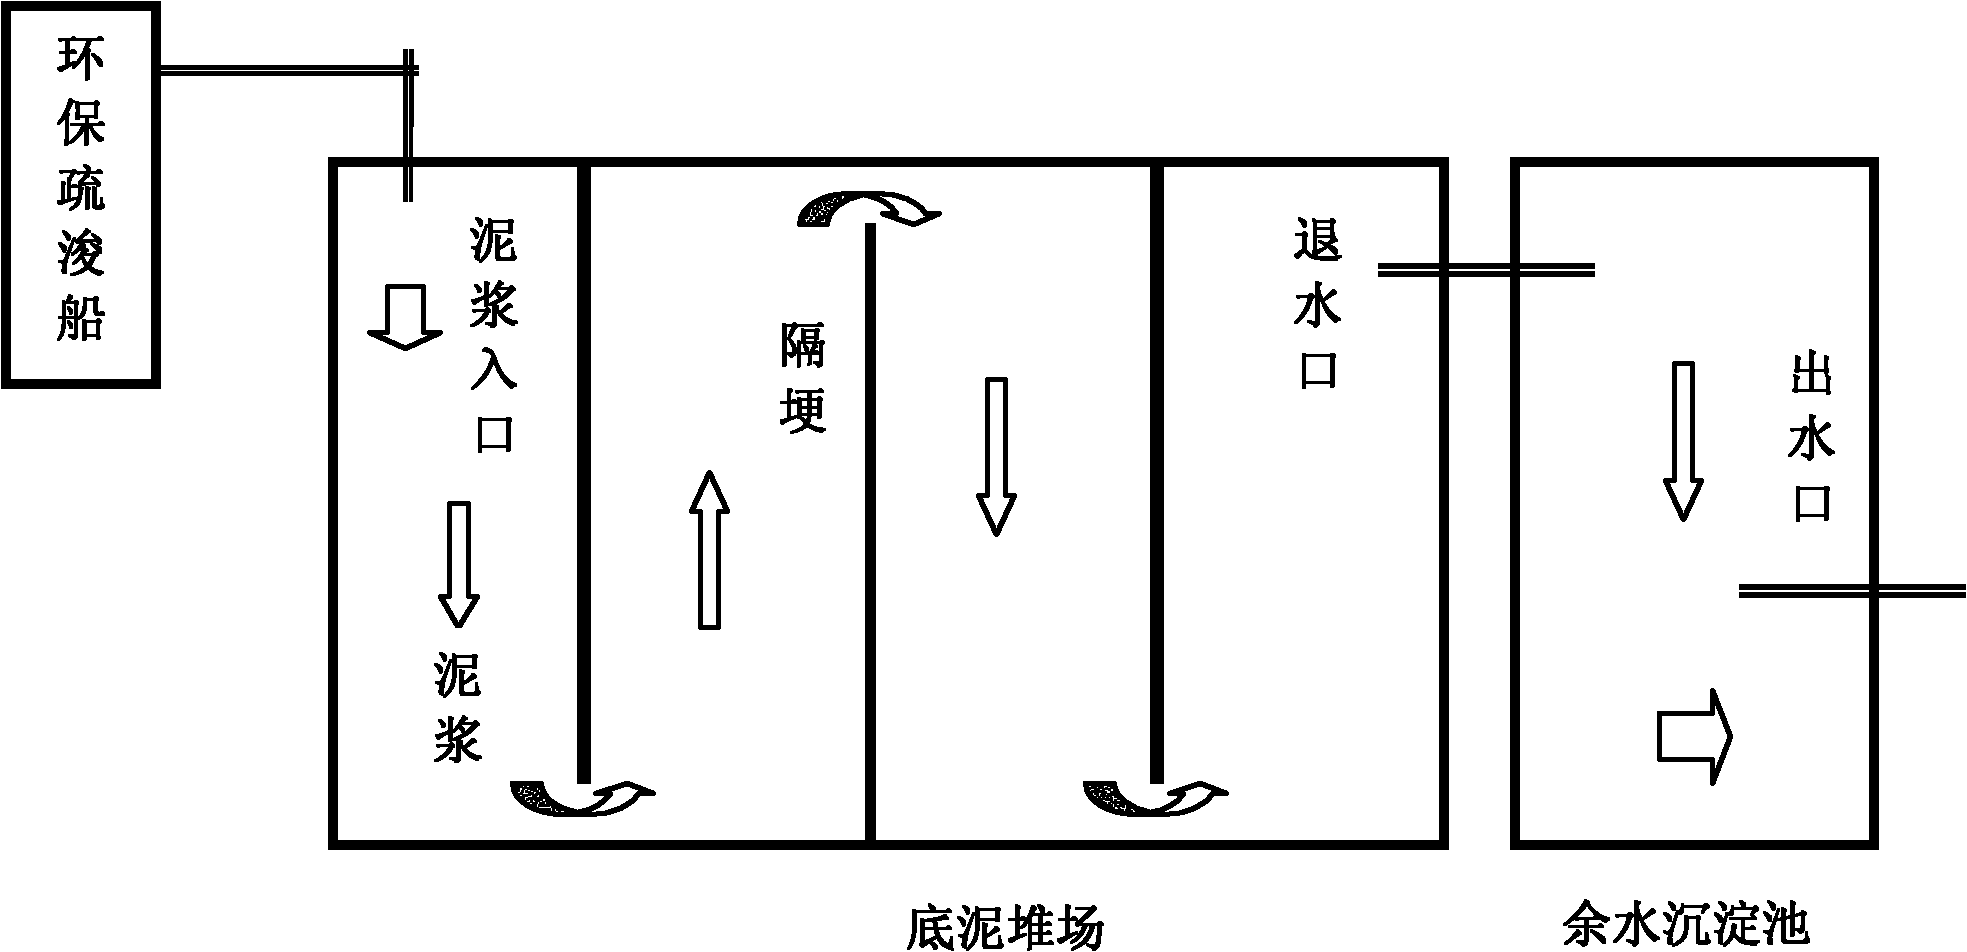 Technique for treating remaining water of desilted sediment in Lake Tai